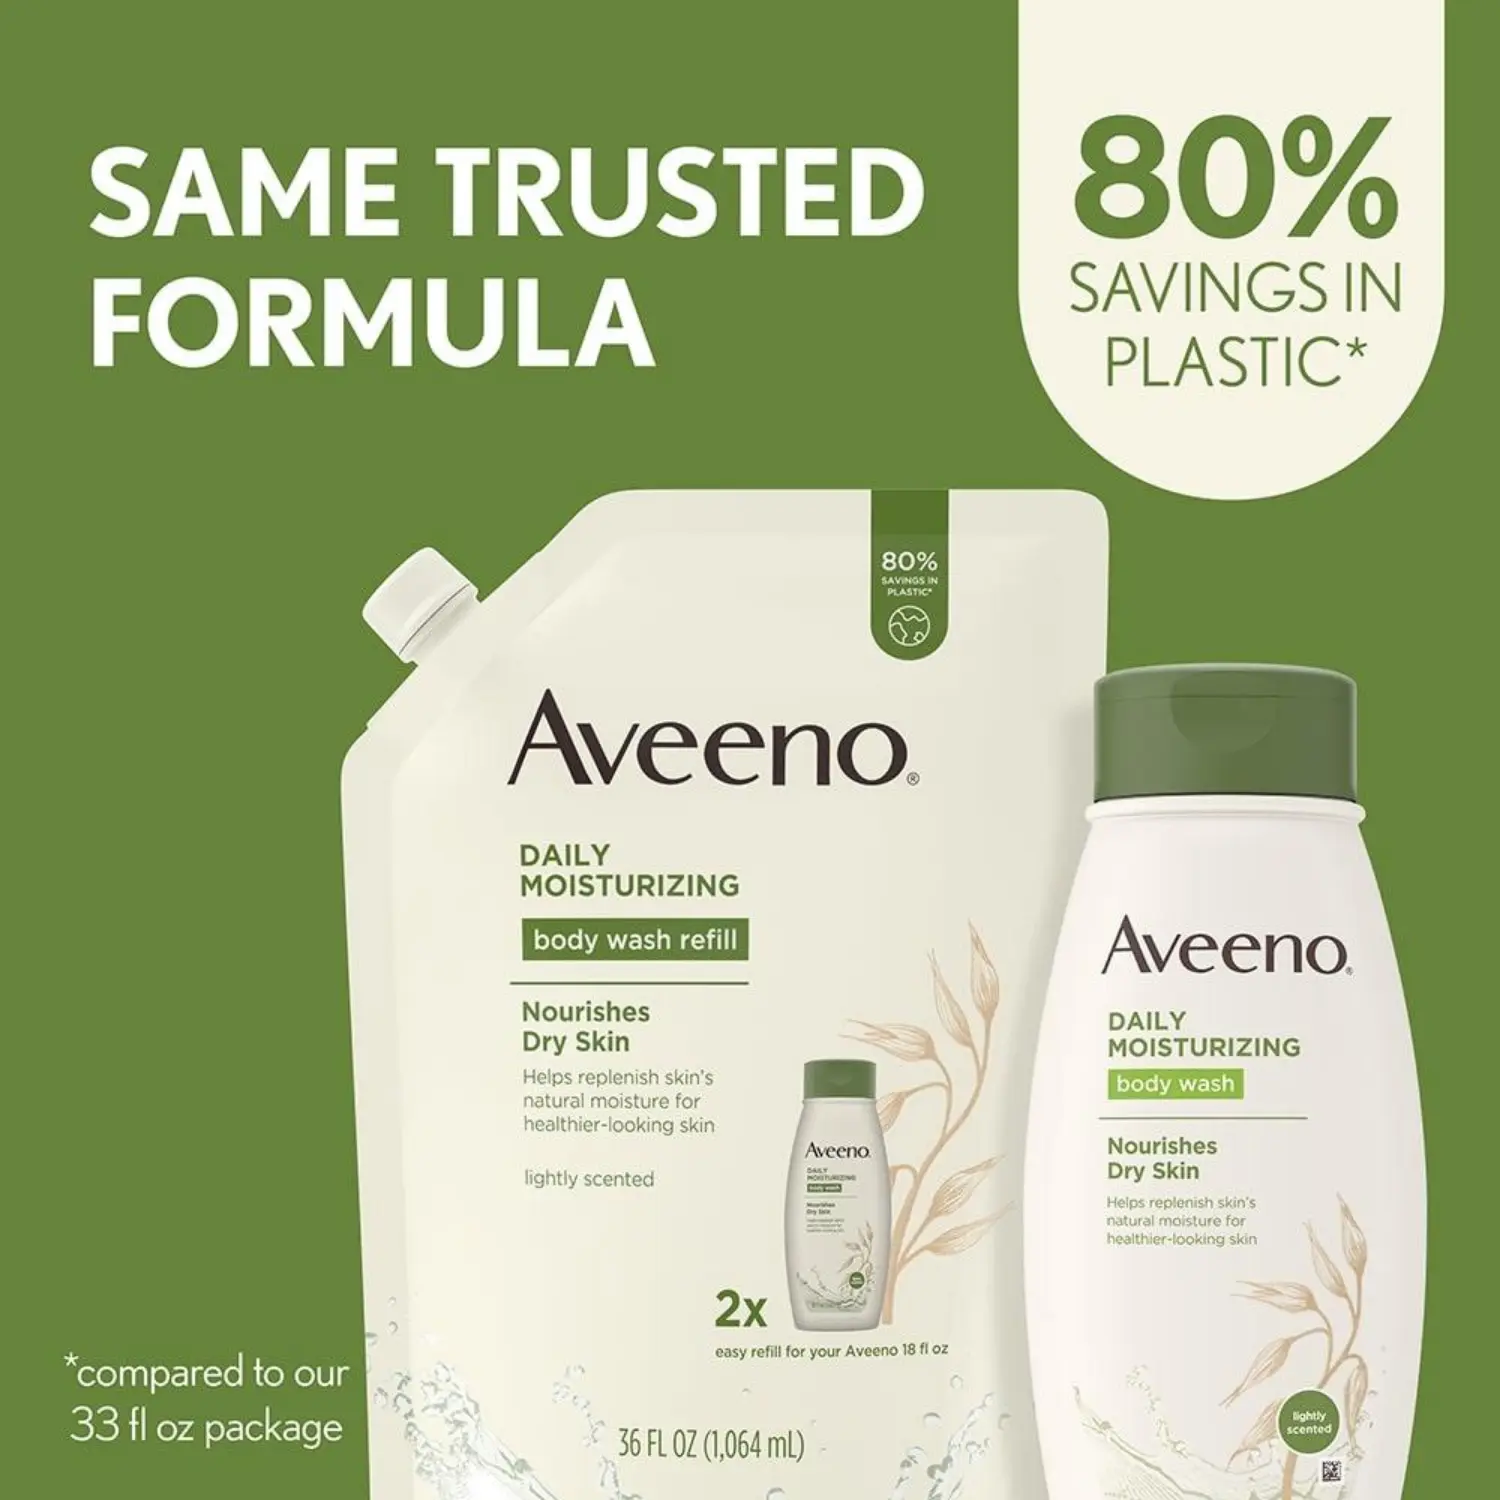 Aveeno Responsible Packaging Products